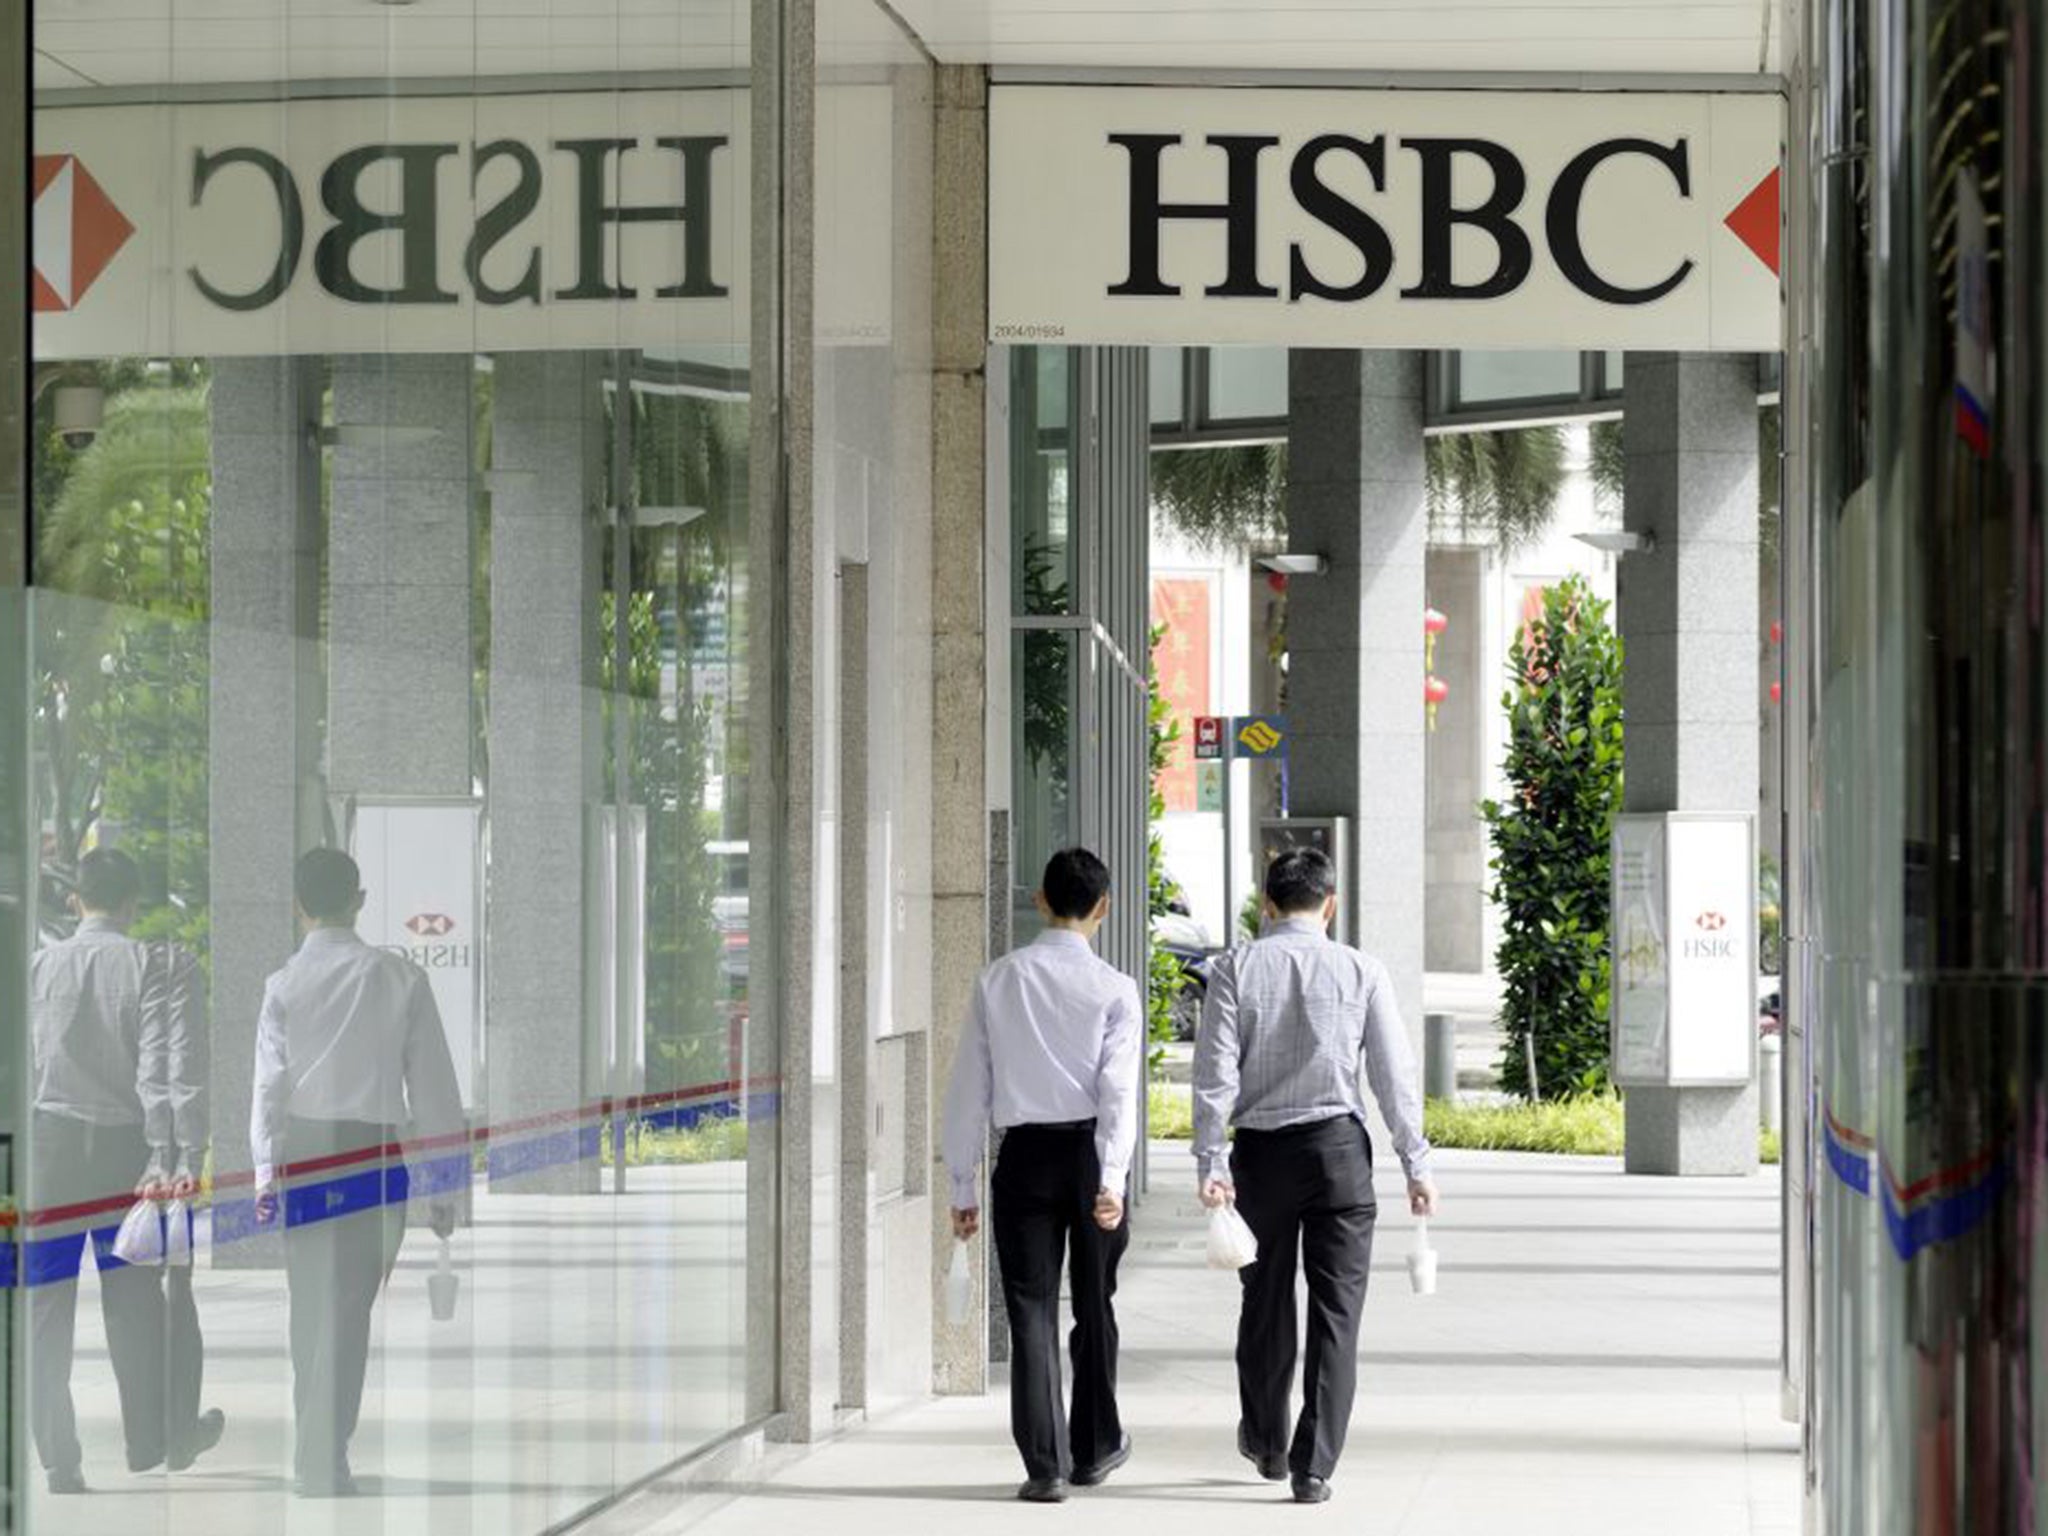 HSBC was originally headquartered in Hong Kong until a move to London in 1992